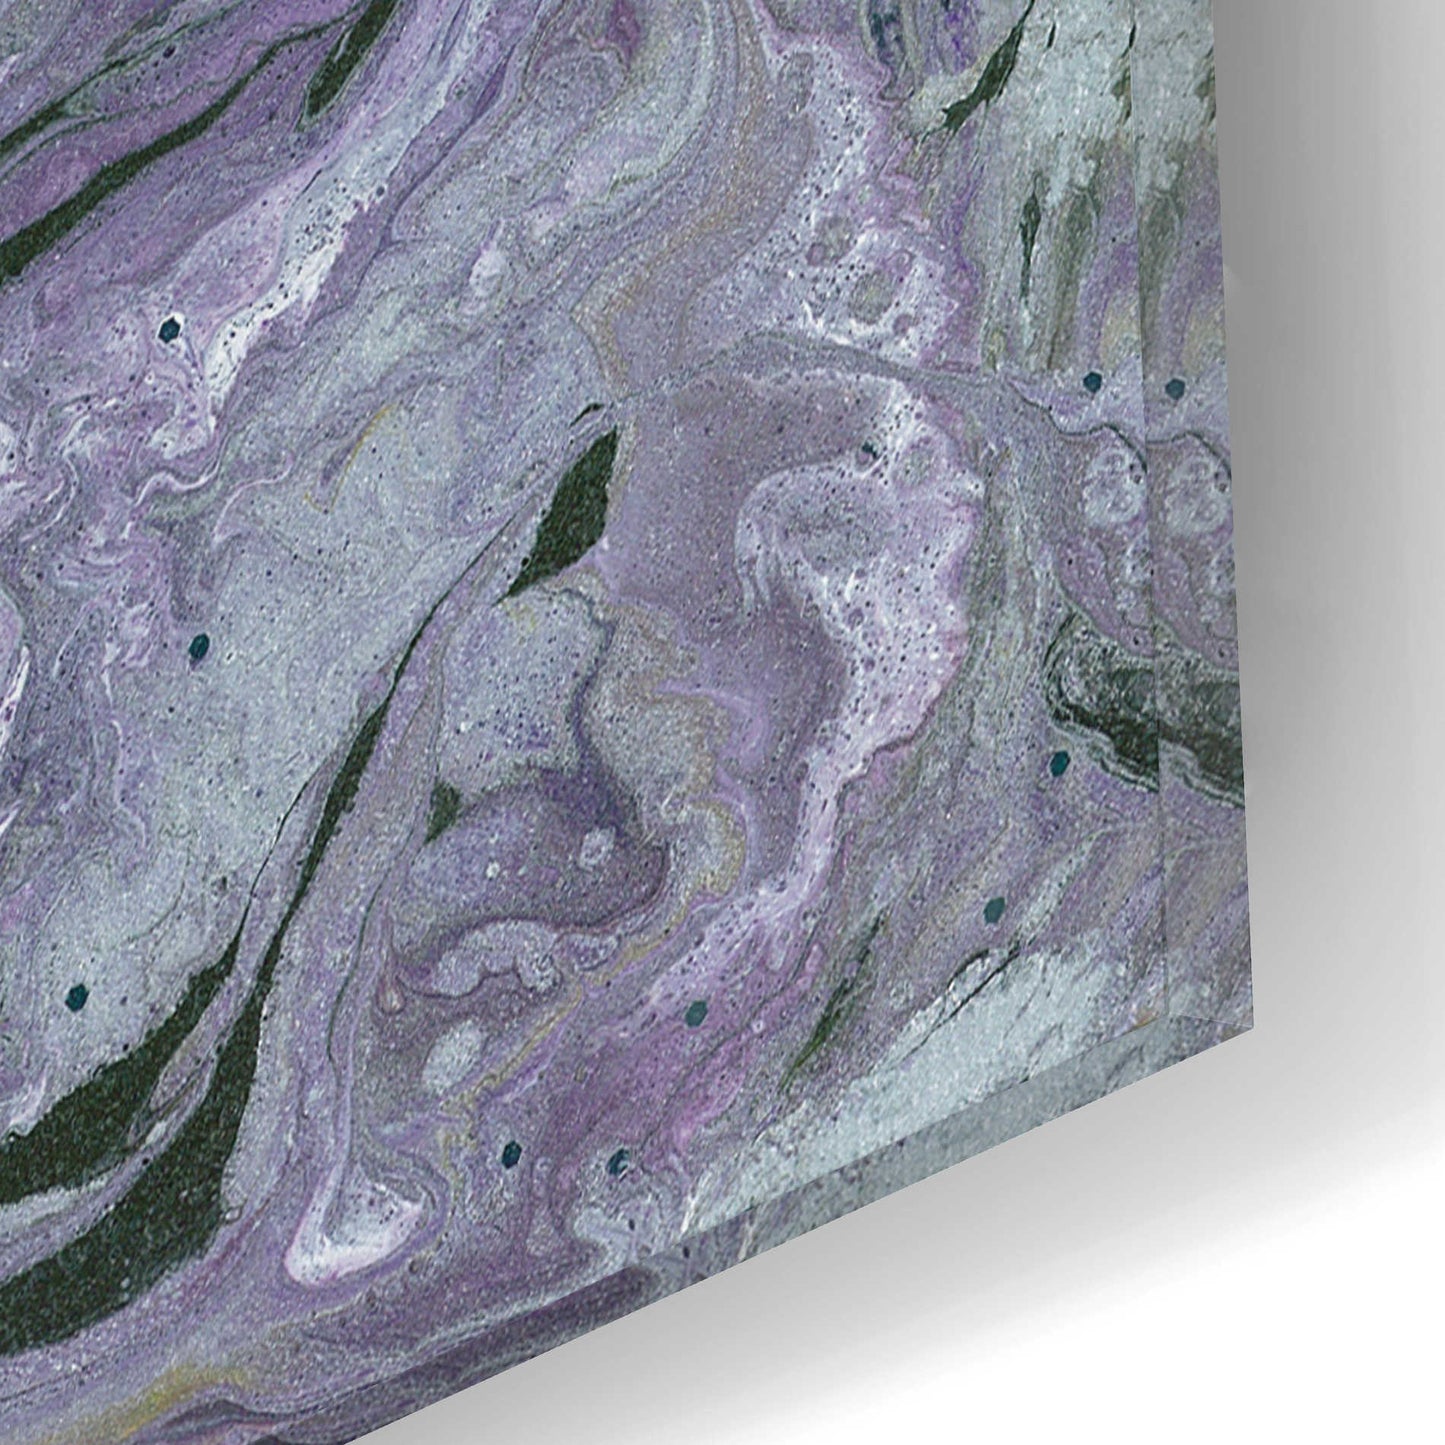 Epic Art 'Abstract in Purple IV' by Cindy Jacobs, Acrylic Glass Wall Art,16x12